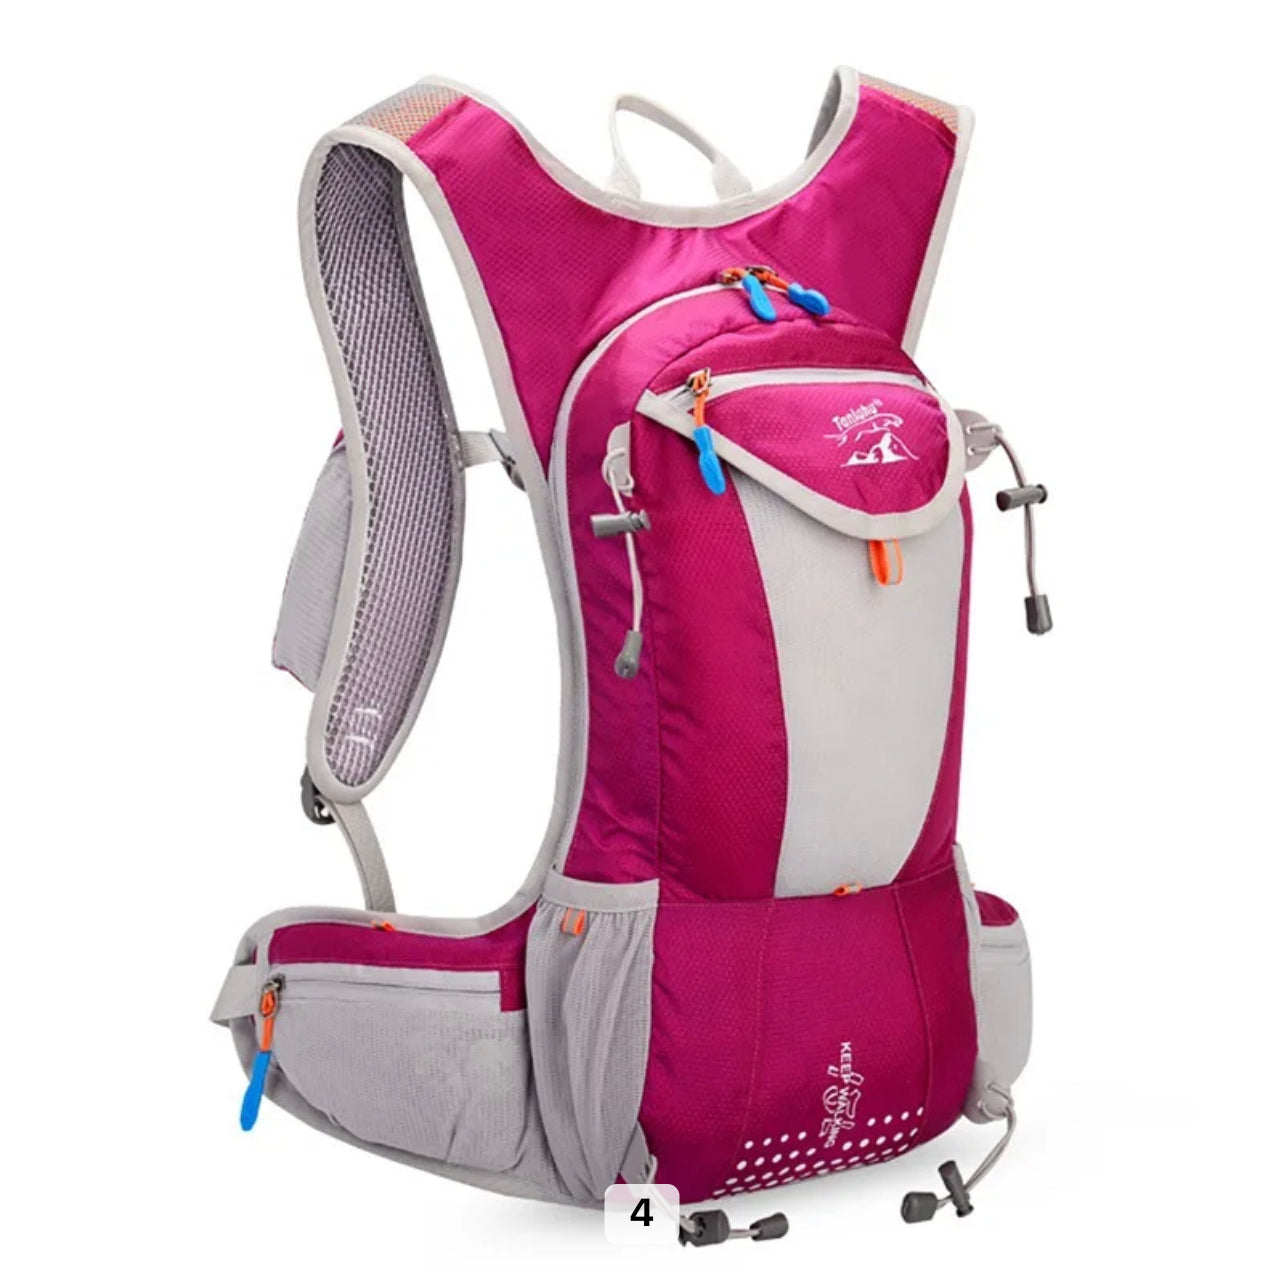 Lightweight Outdoor Nylon Hydration Backpack. Climbing, Bicycle, Running, Backpack Vest